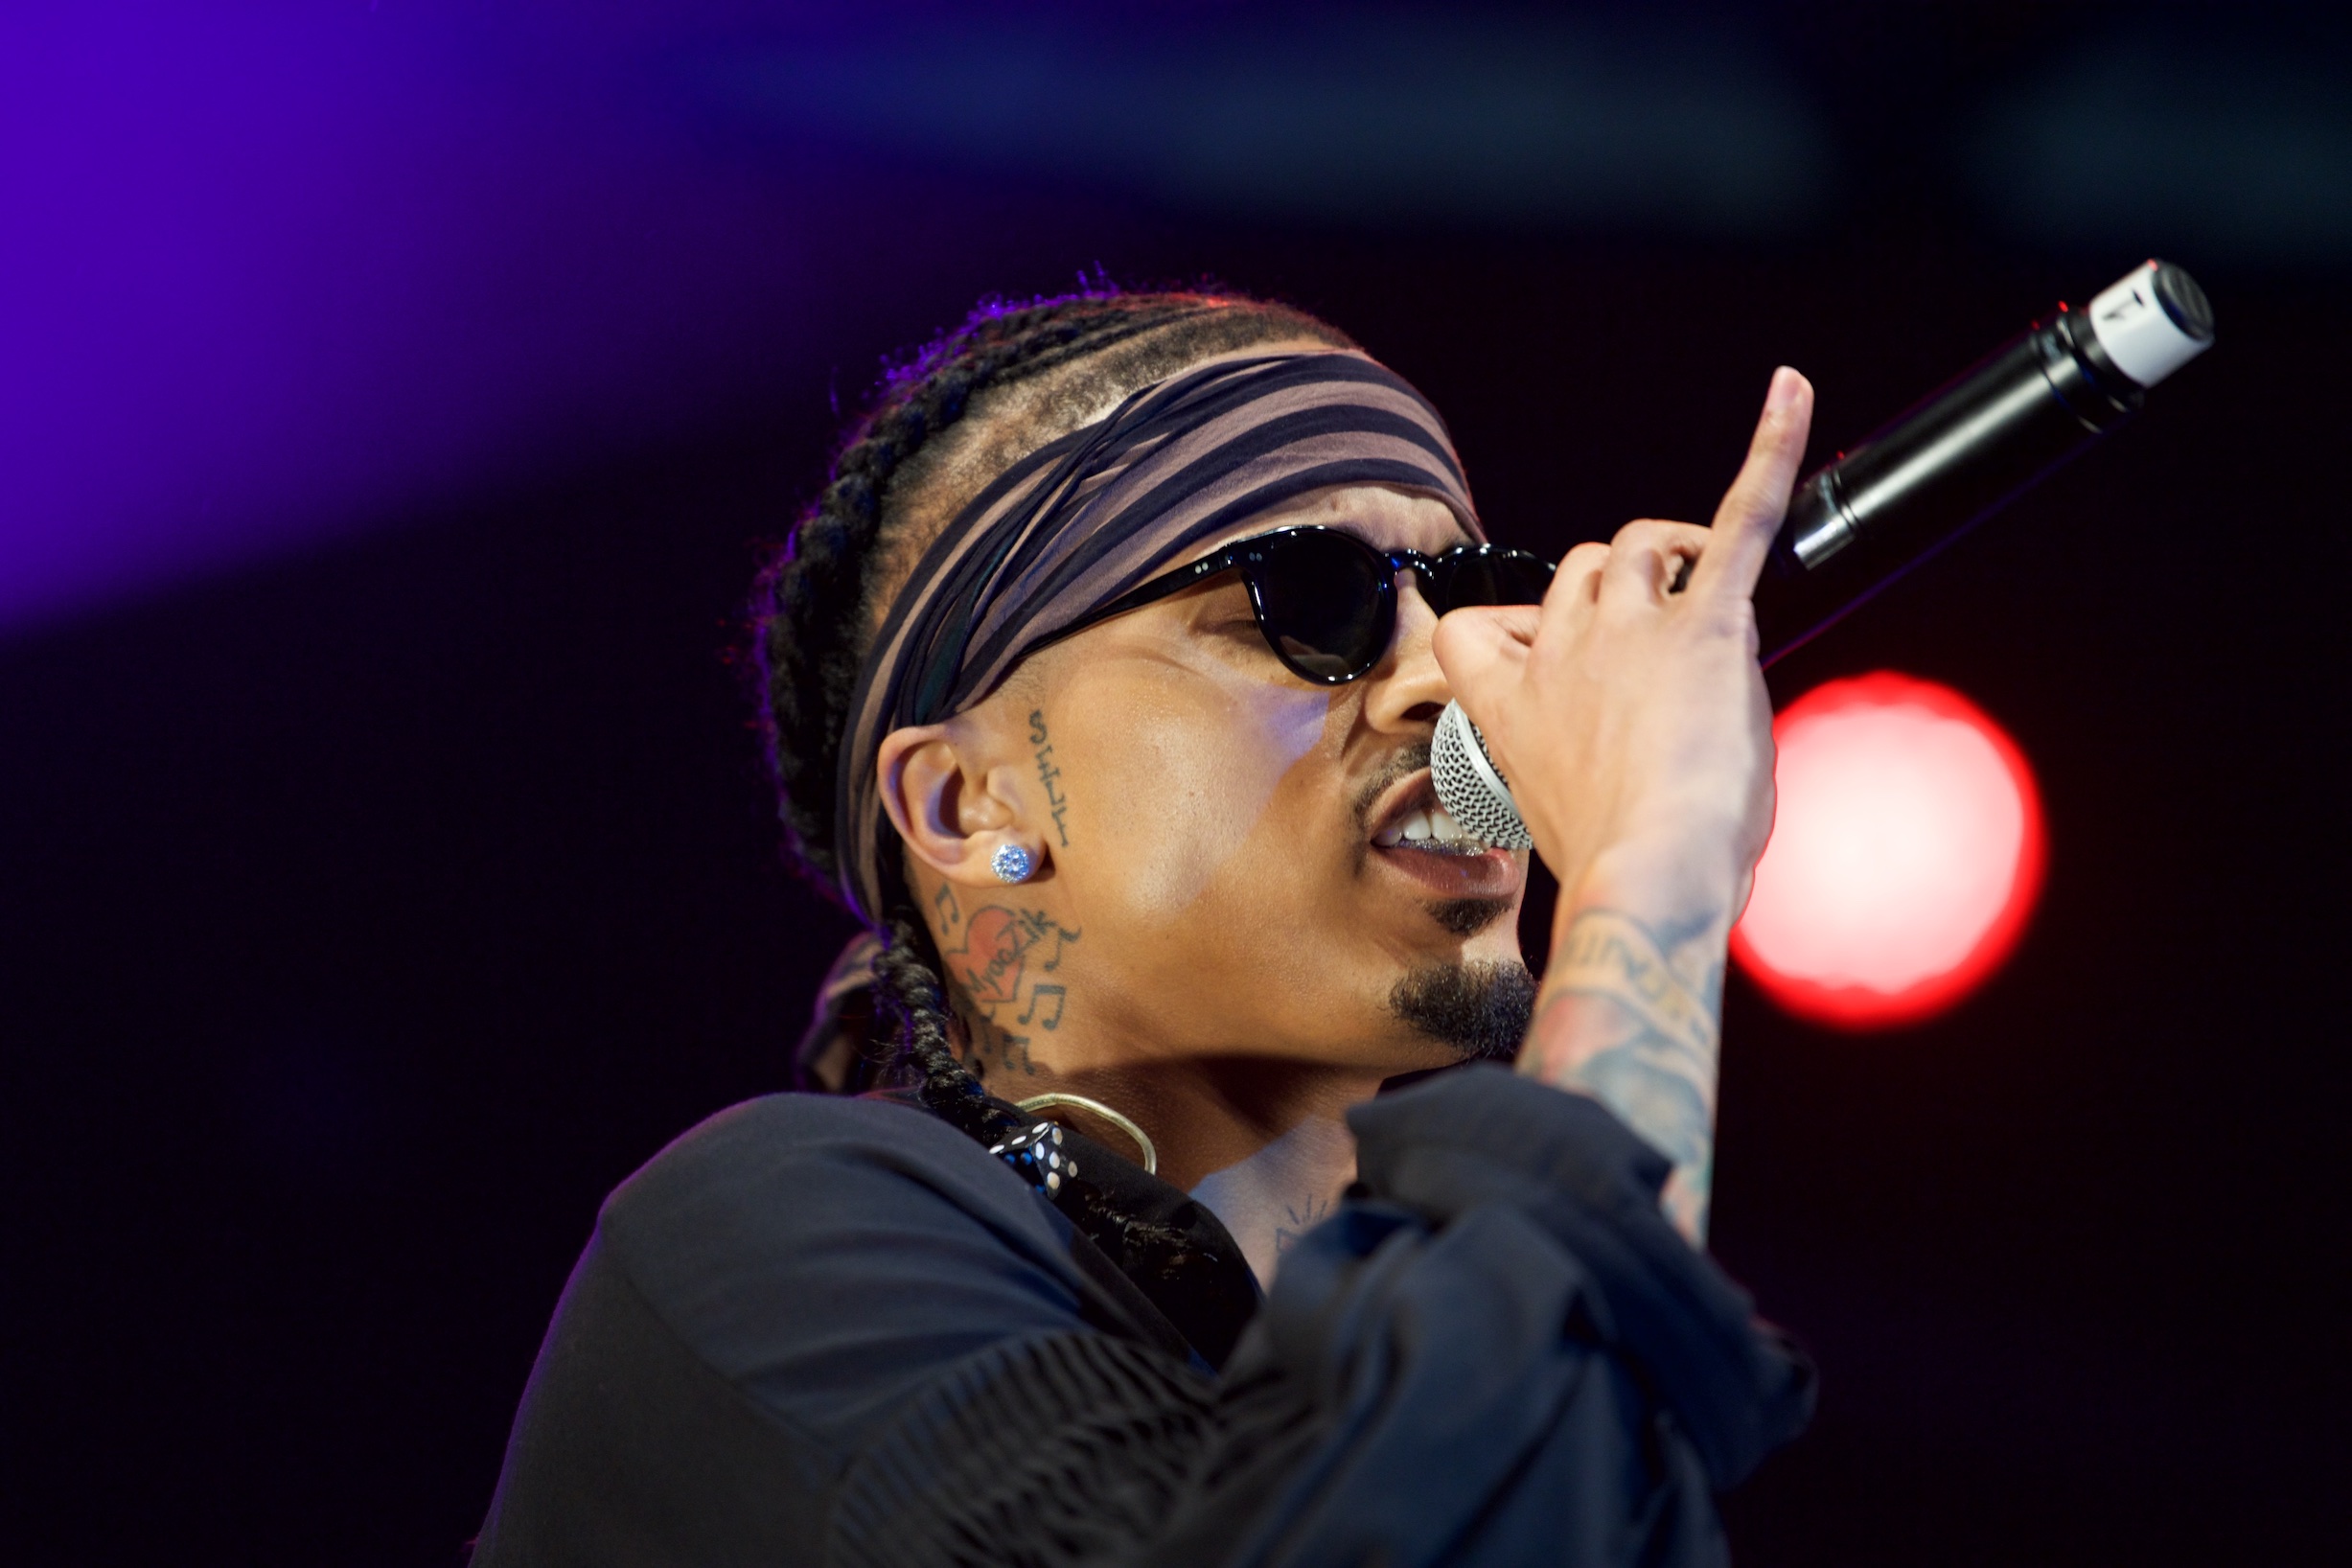 Record Producer August Alsina performs at the Los Angeles Soul Music Festival at Exposition Park